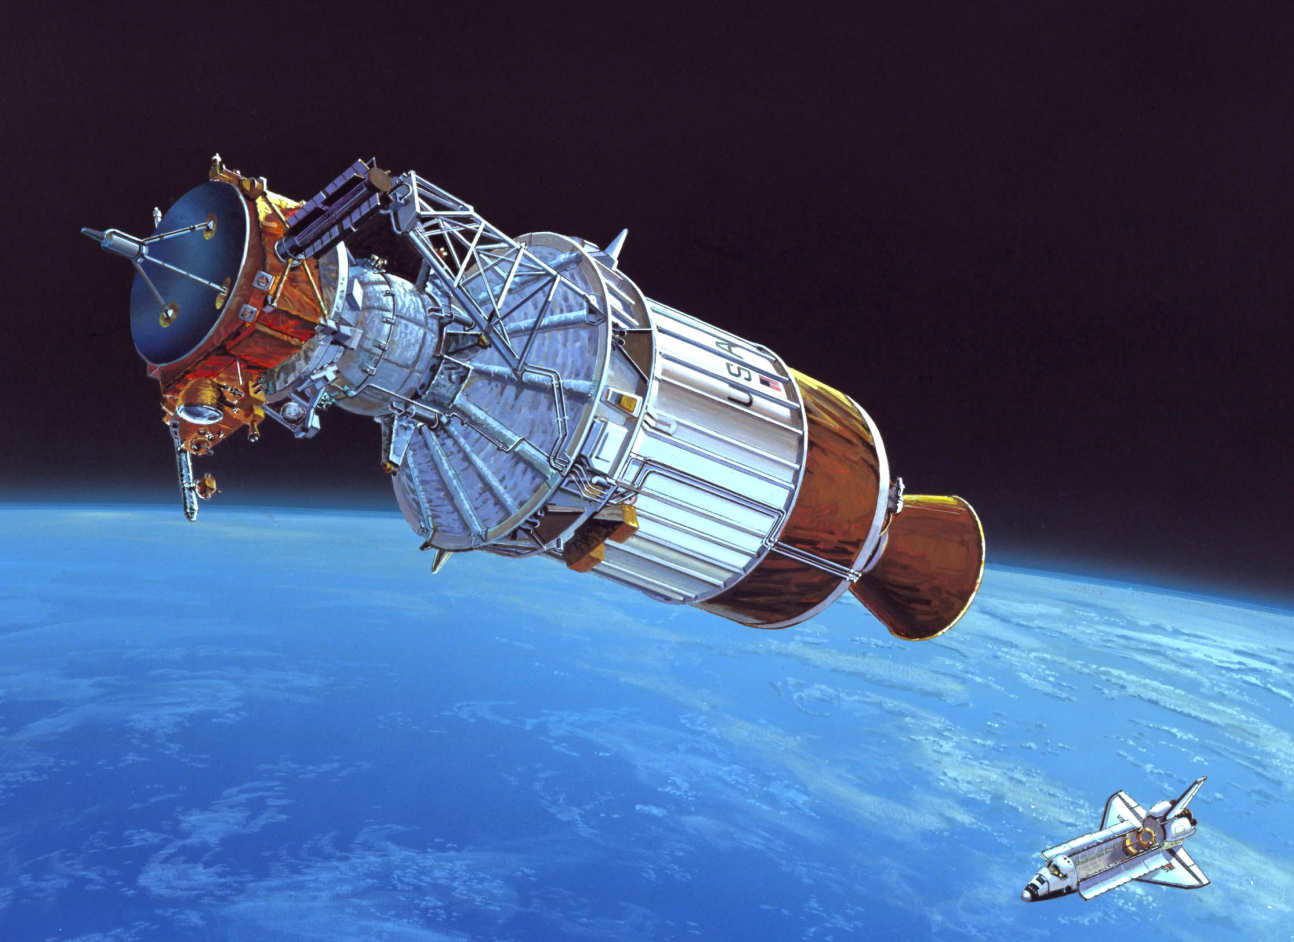 Artist's conception of the release of Ulysses atop the IUS (Intertial Upper Stage) from the Space Shuttle Discovery.